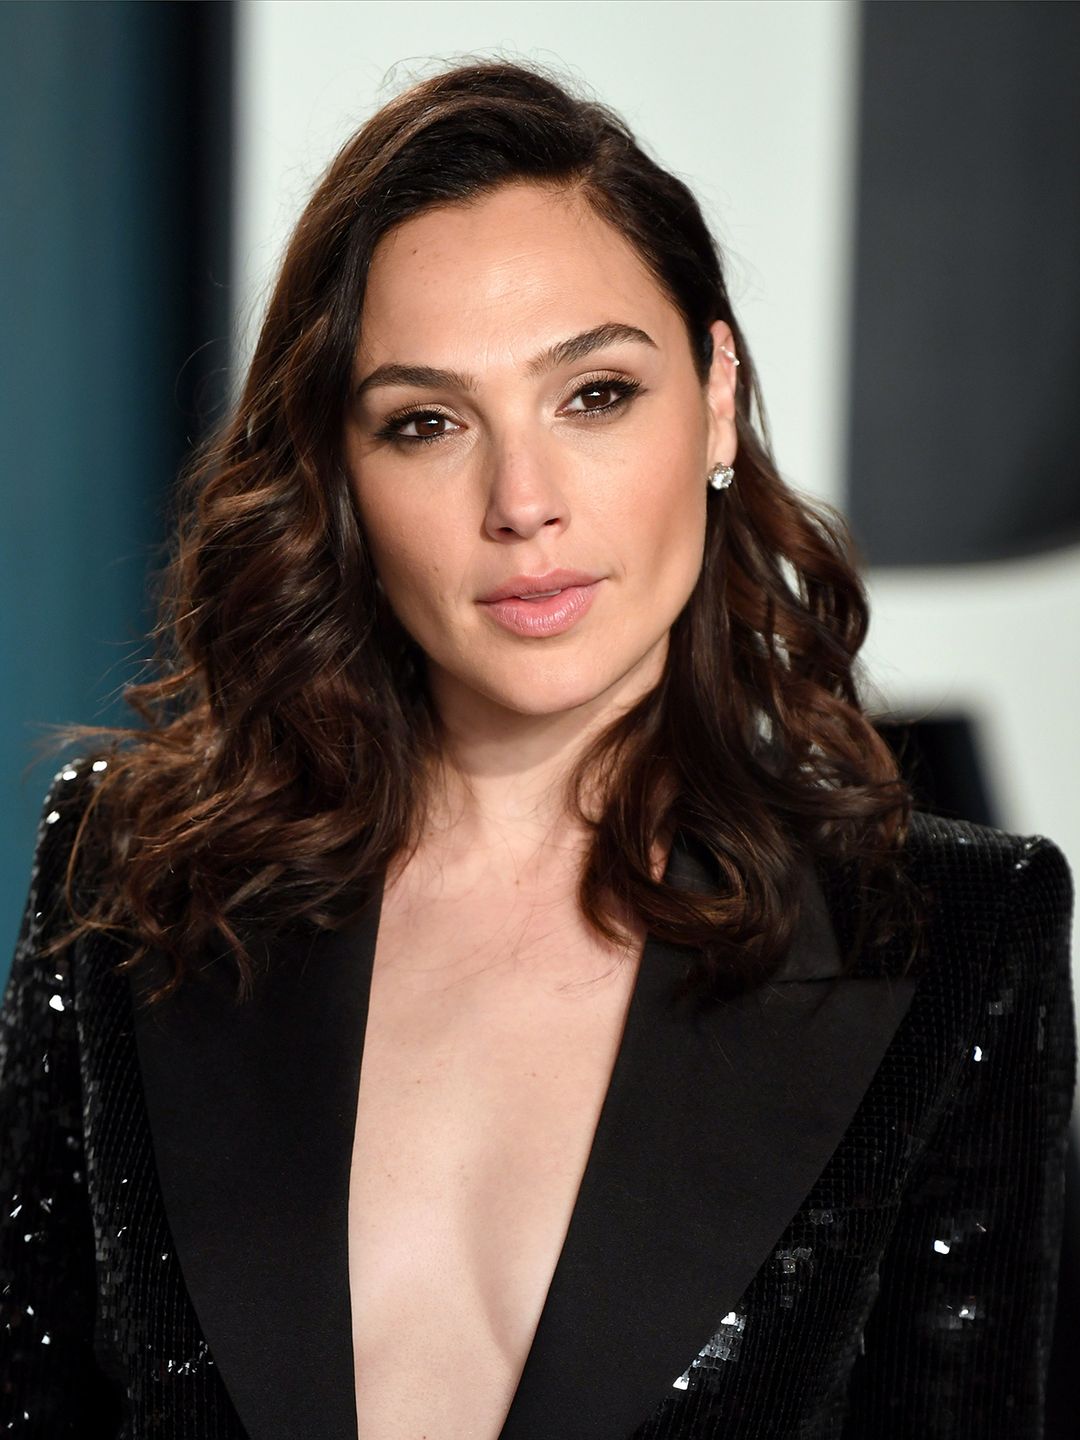 Gal Gadot who is her mother